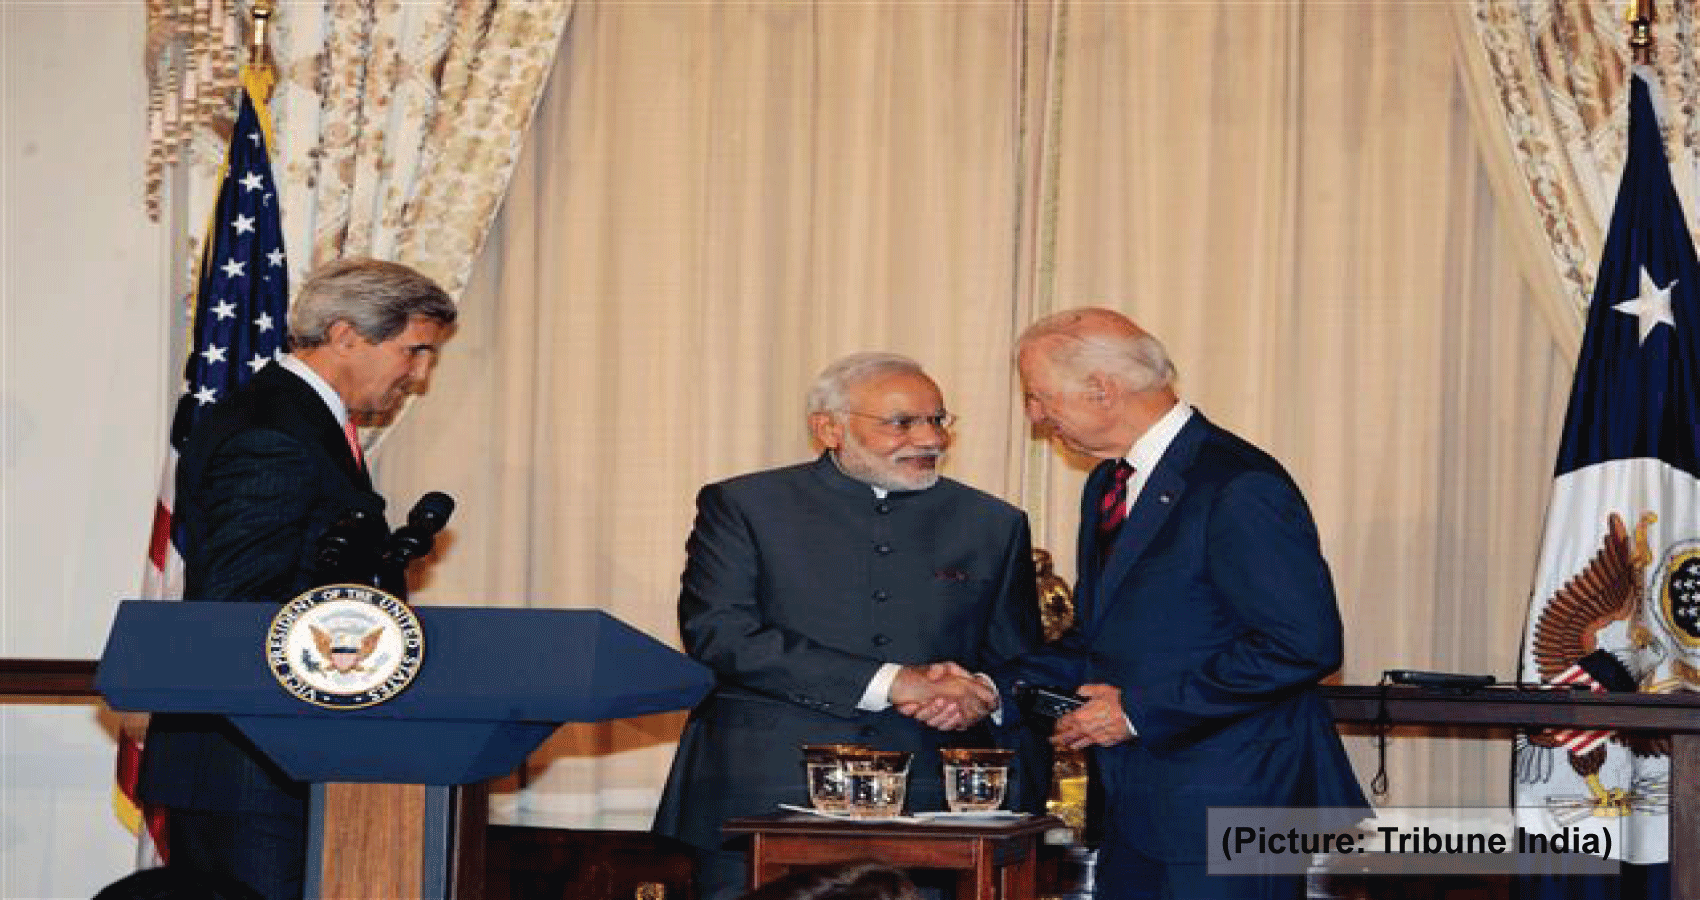 Modi-And-Joe-Biden-To-Strengthen-Peace-Security-In-Indo-Pacific-Region-India-Has-High-Hopes-Ties-with-U.S.-Will-Deepen-Under-Biden